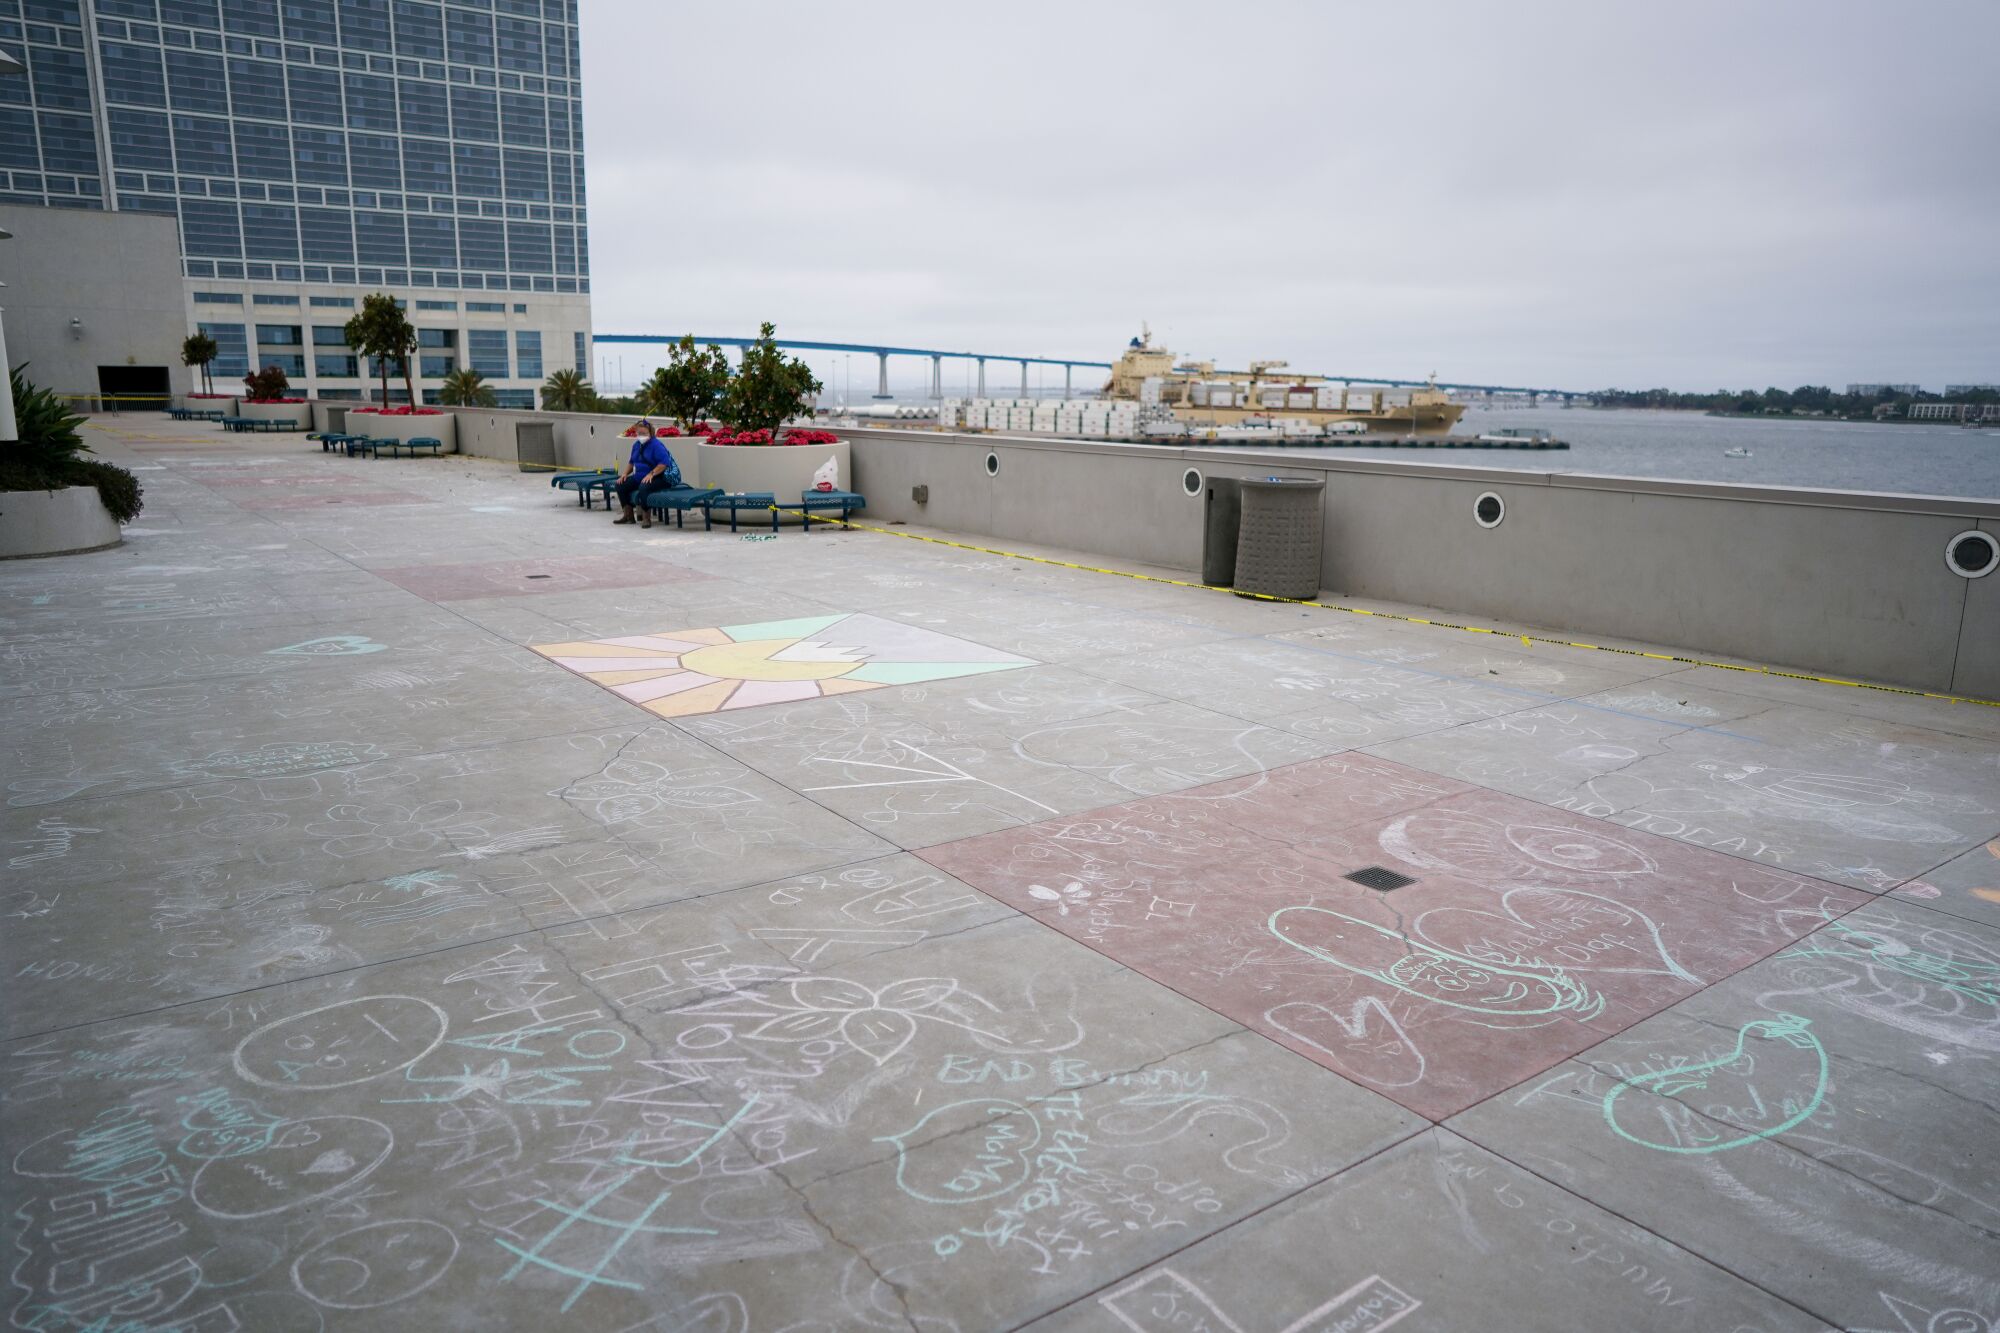 Chalk drawings are scattered on the ground on the terrace outside the upper level of the convention center